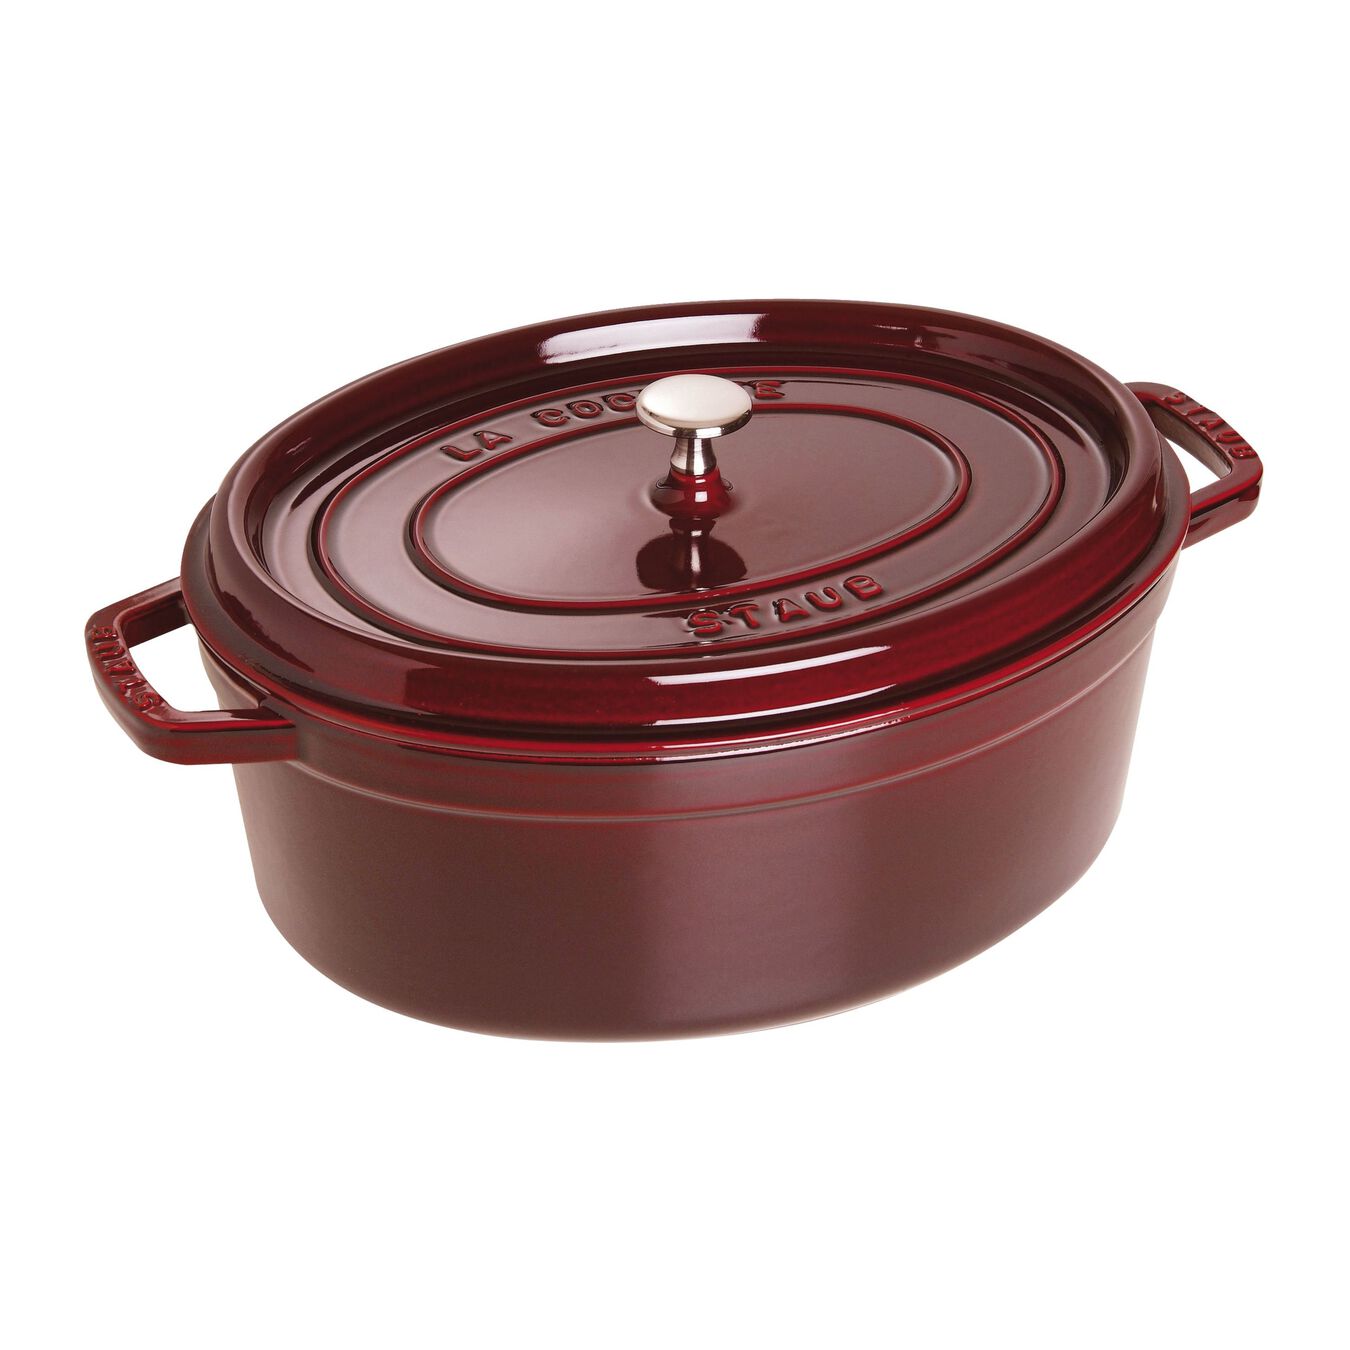 5.5 l cast iron oval Cocotte, grenadine-red,,large 1